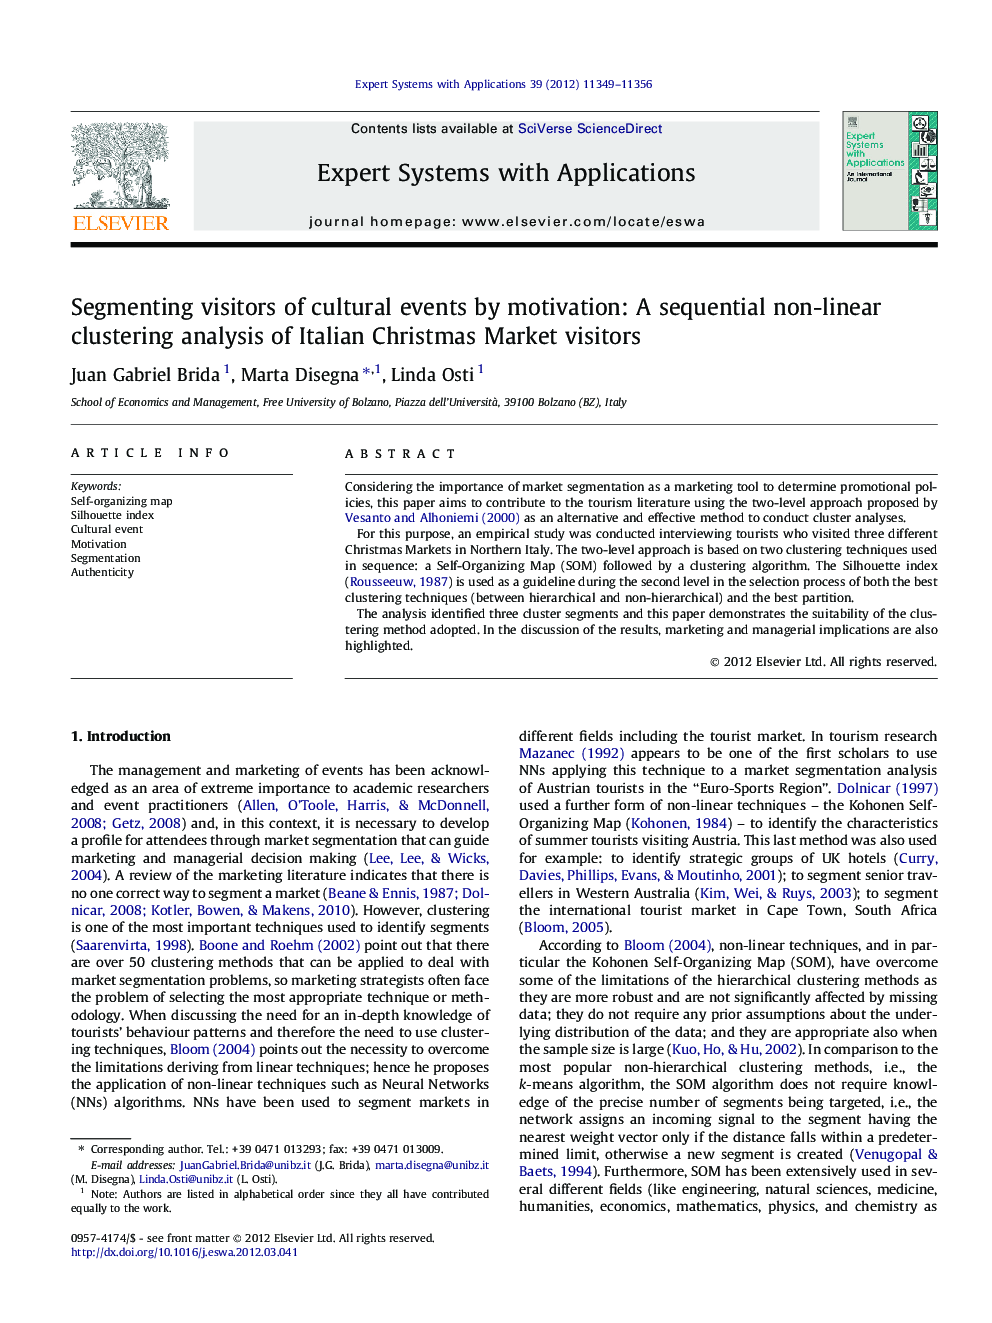 Segmenting visitors of cultural events by motivation: A sequential non-linear clustering analysis of Italian Christmas Market visitors